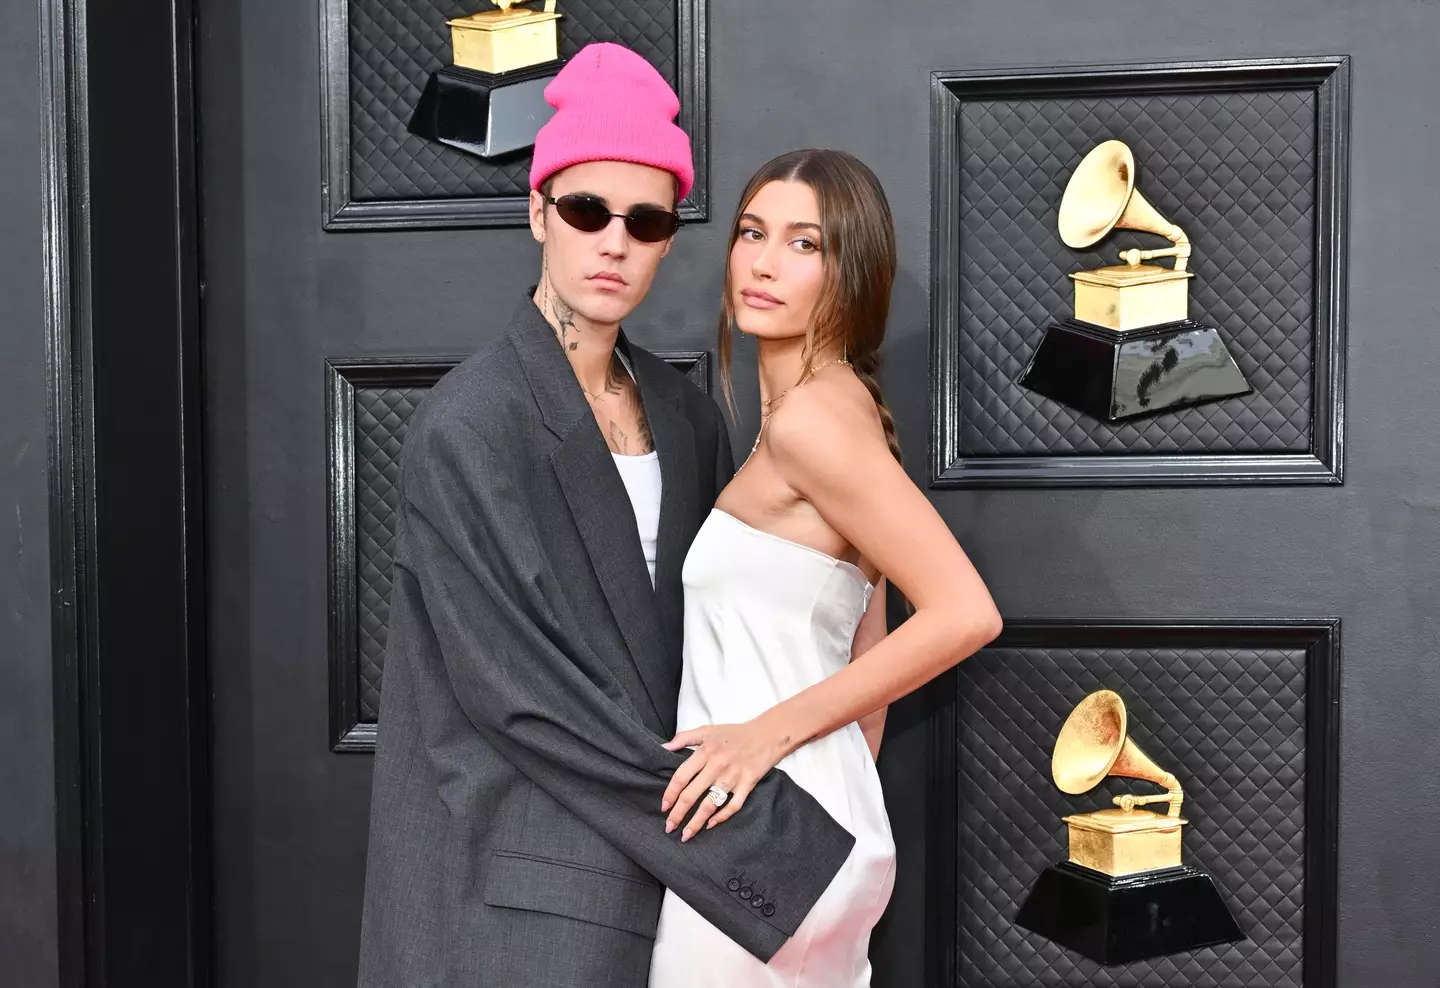 Hailey and Justin Bieber have been married since 2019. (Brian Friedman/Variety/Penske Media via Getty Images)